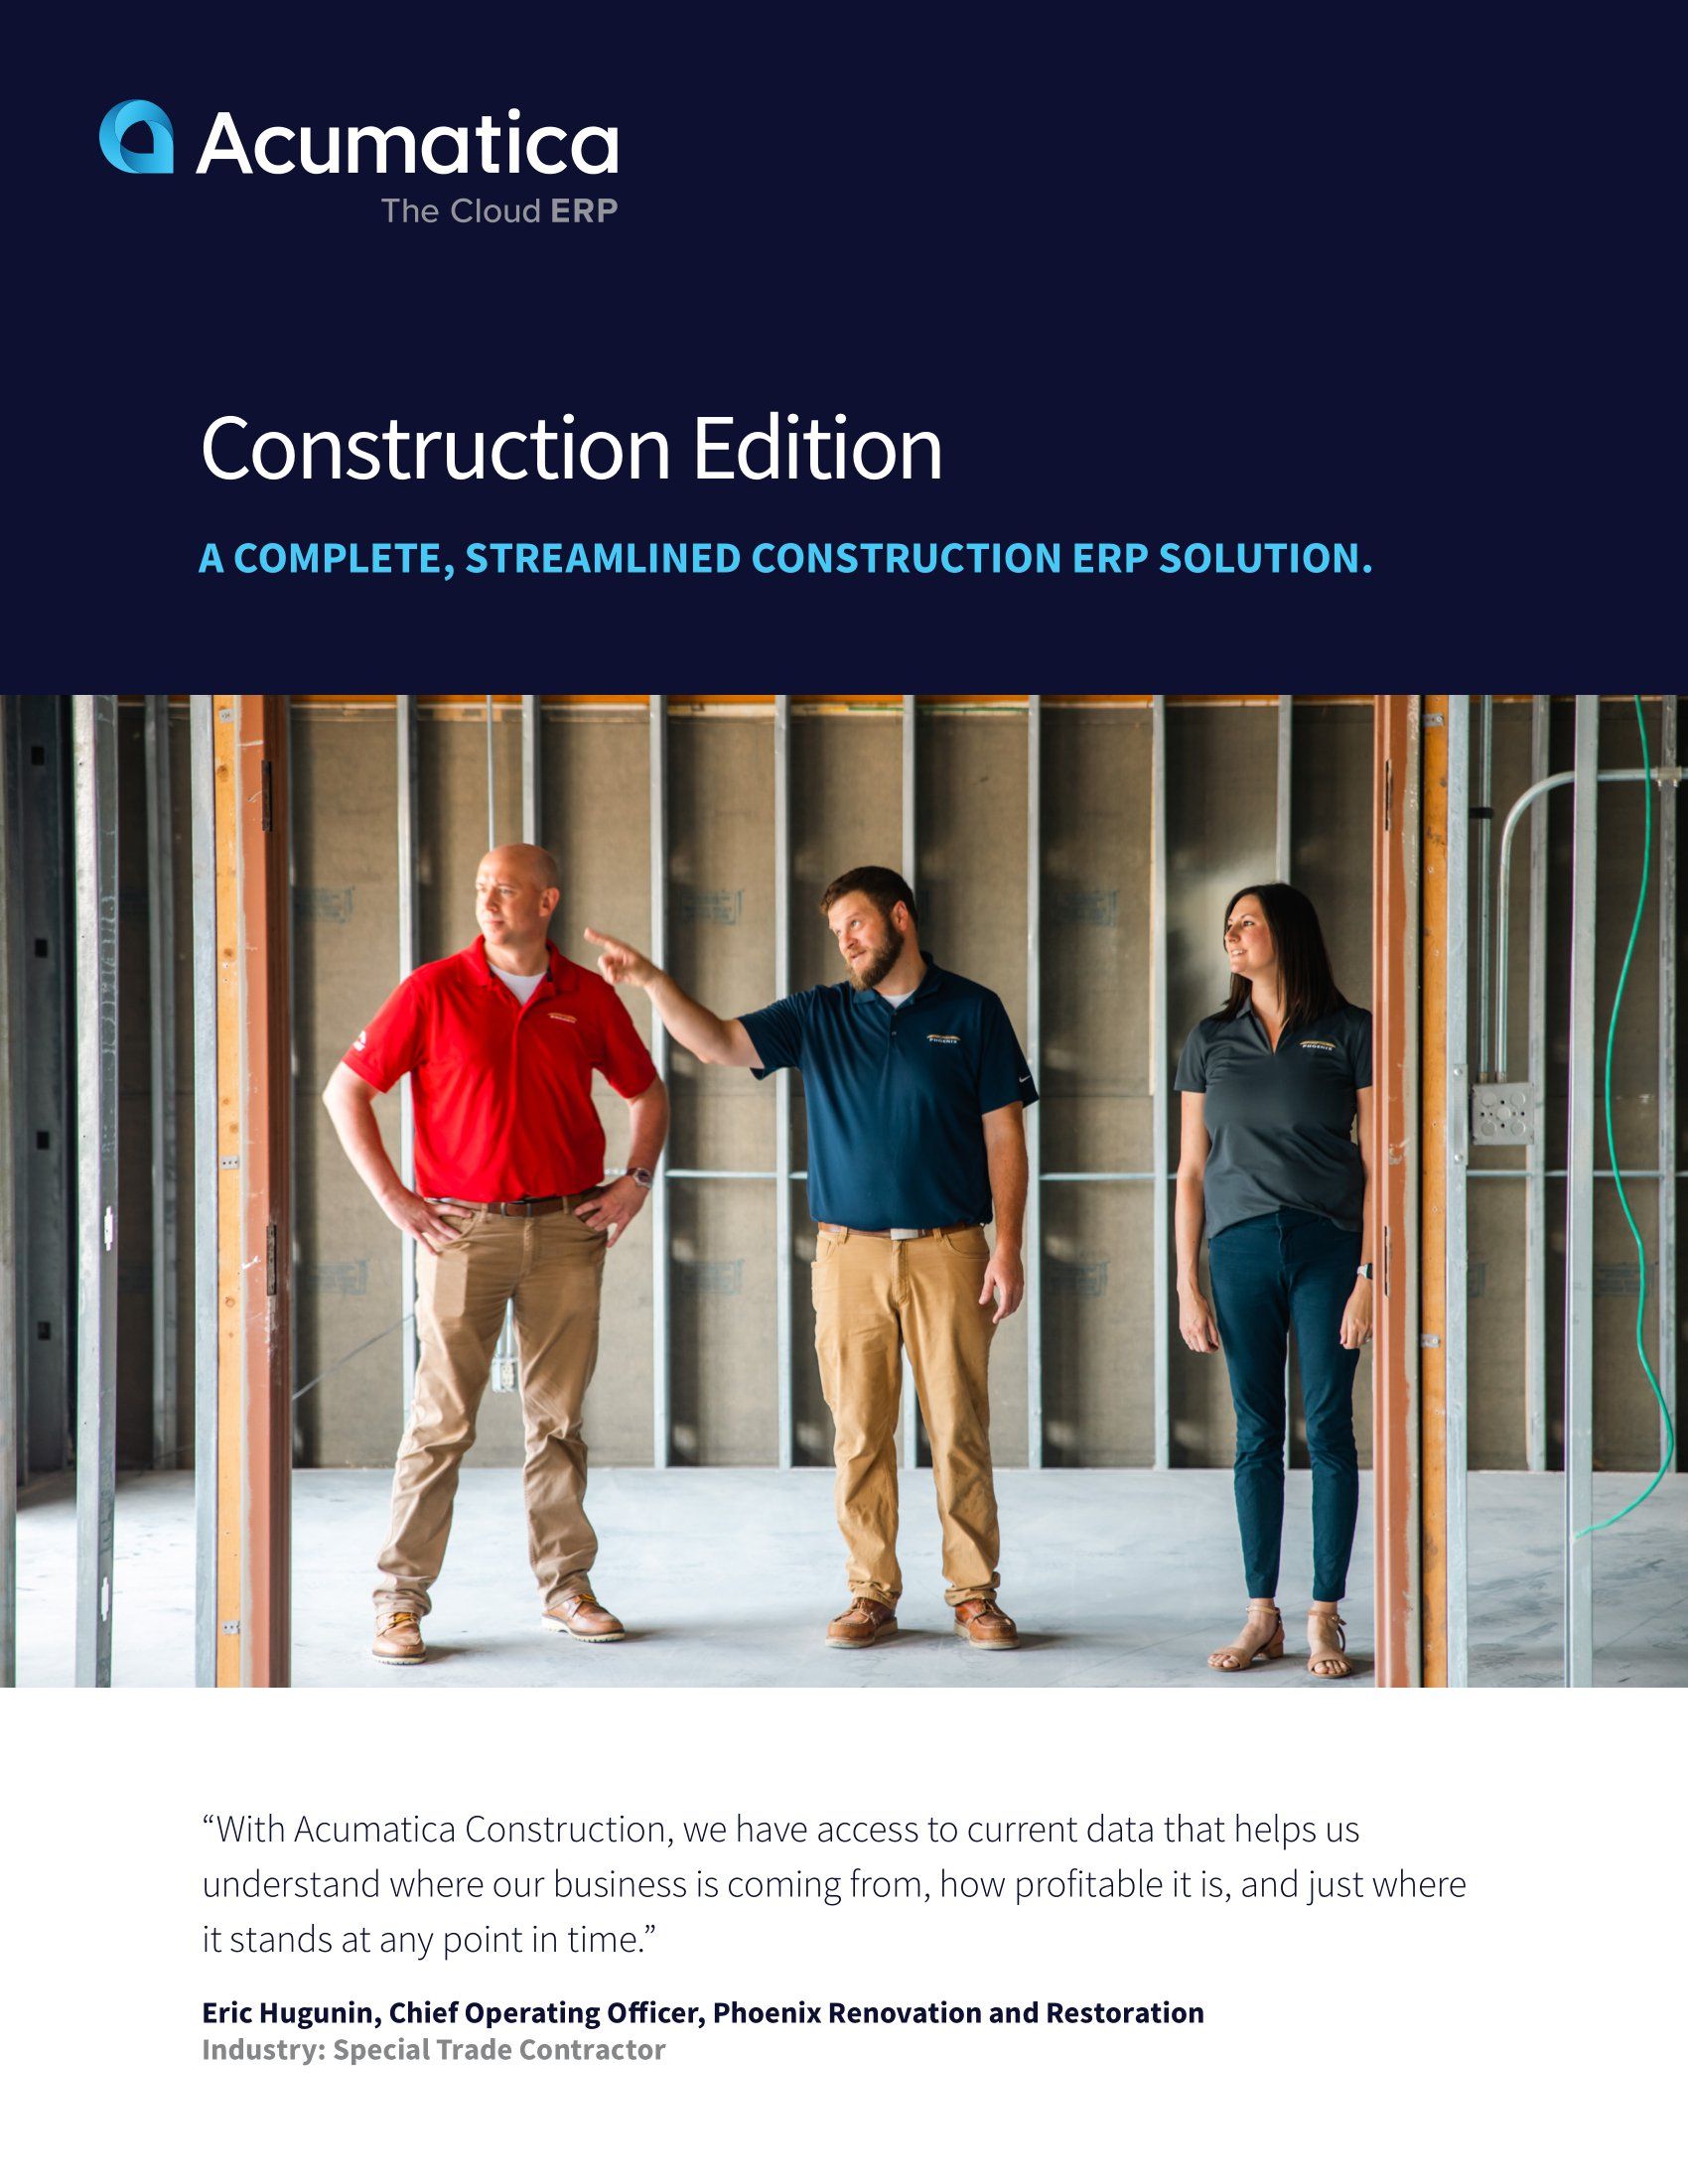 Acumatica Construction Edition:  A Complete ERP Solution to Meet All of Your Needs